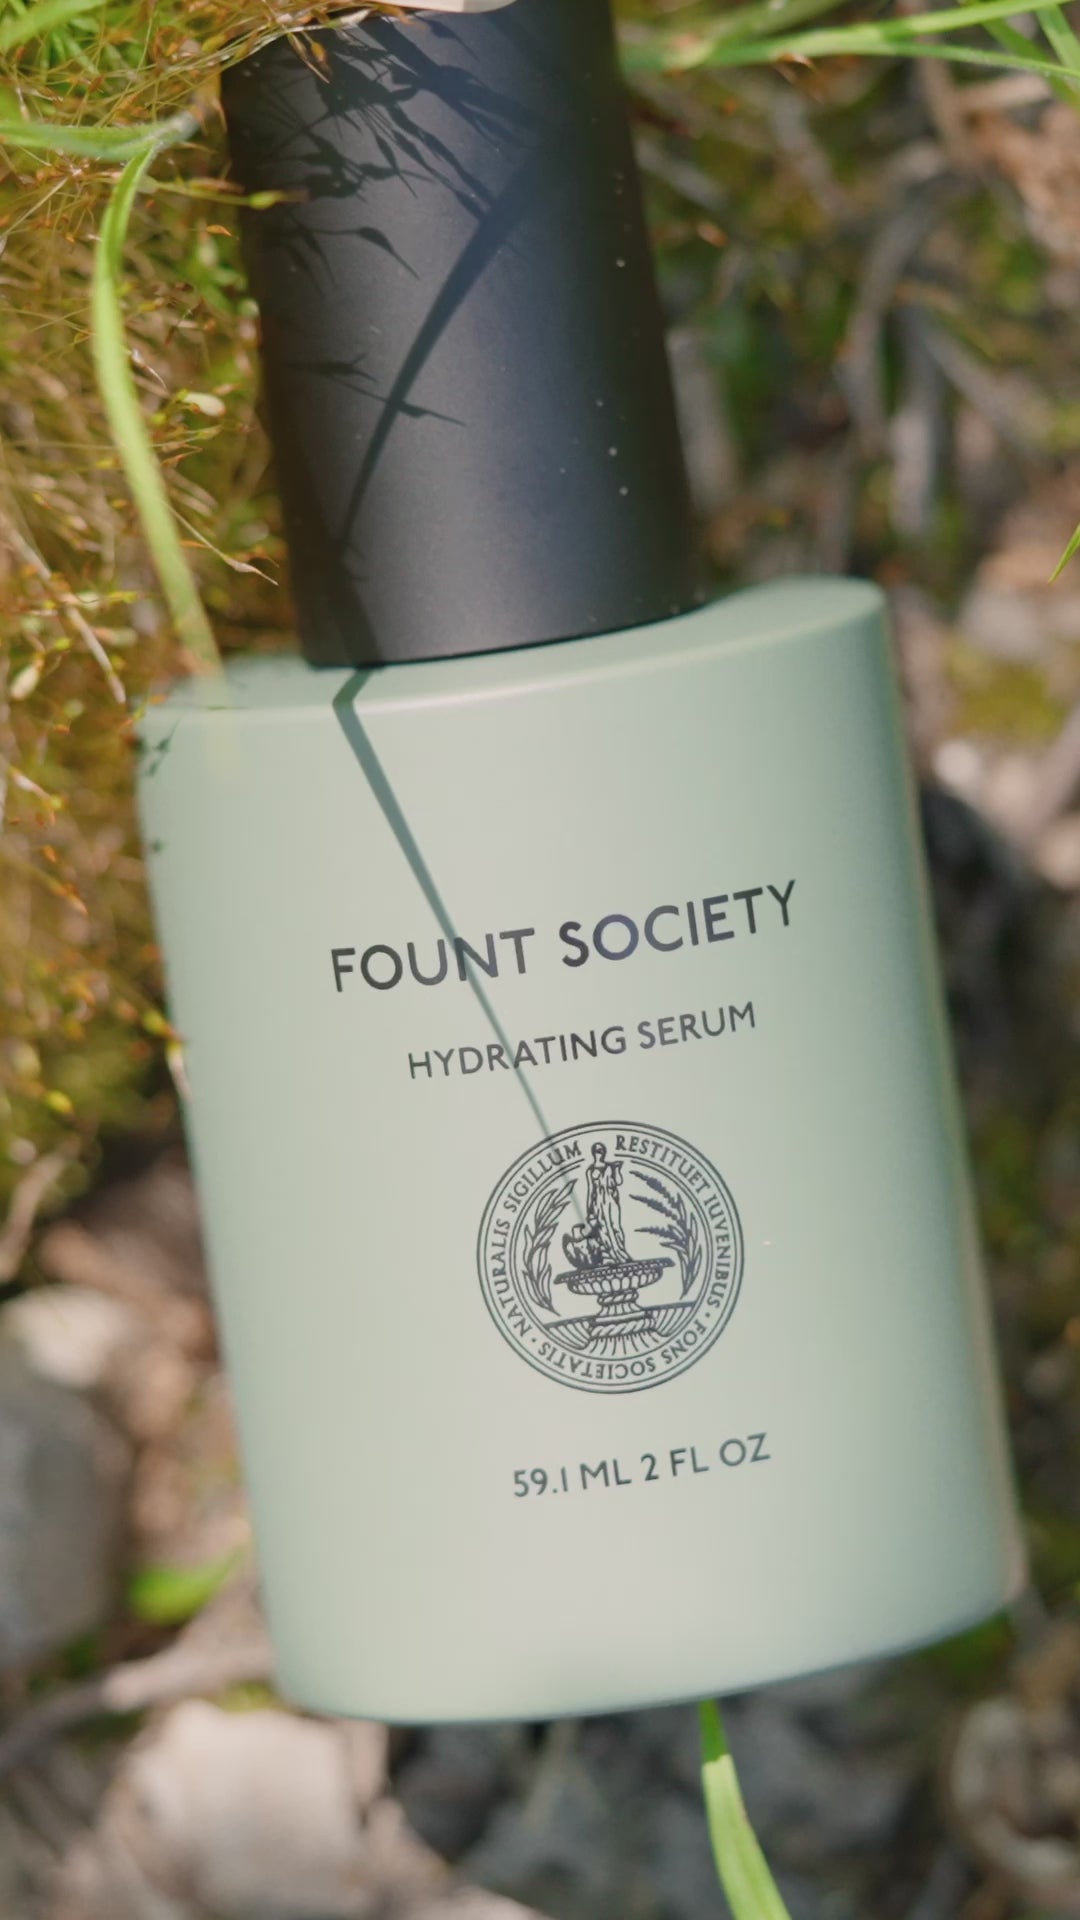 Fount Hydrating Serum application instructions. Apply to a clean face, gently massage into skin.